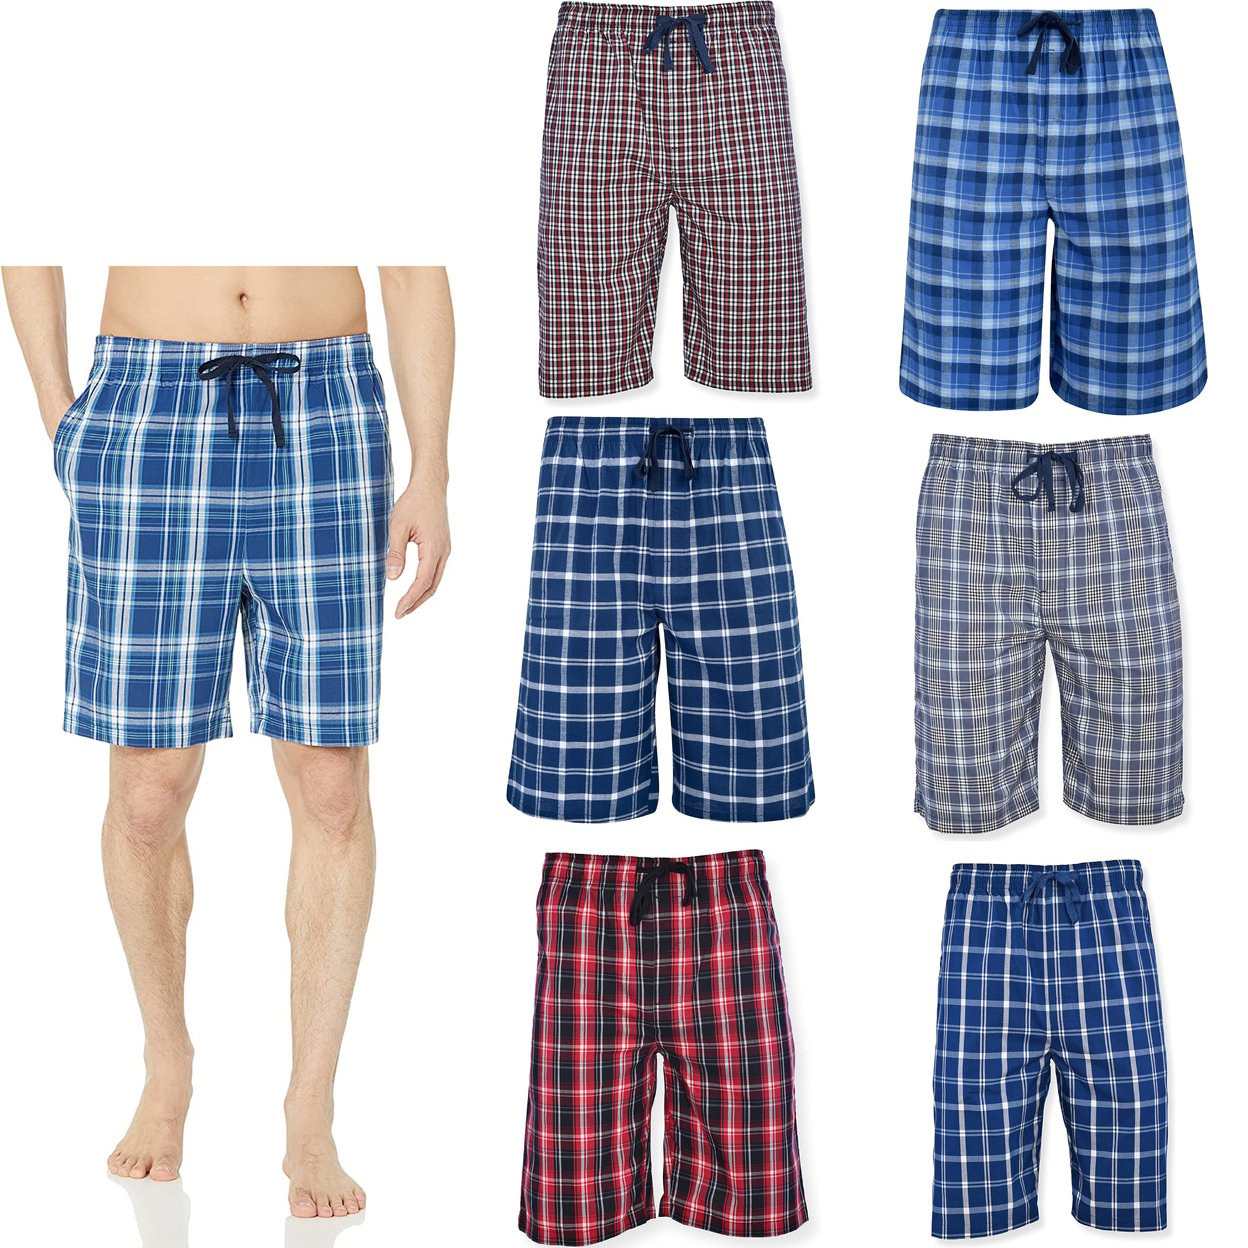 2-Pack: Men's Ultra Soft Plaid Lounge Pajama Sleep Wear Shorts - Red& Red, Large